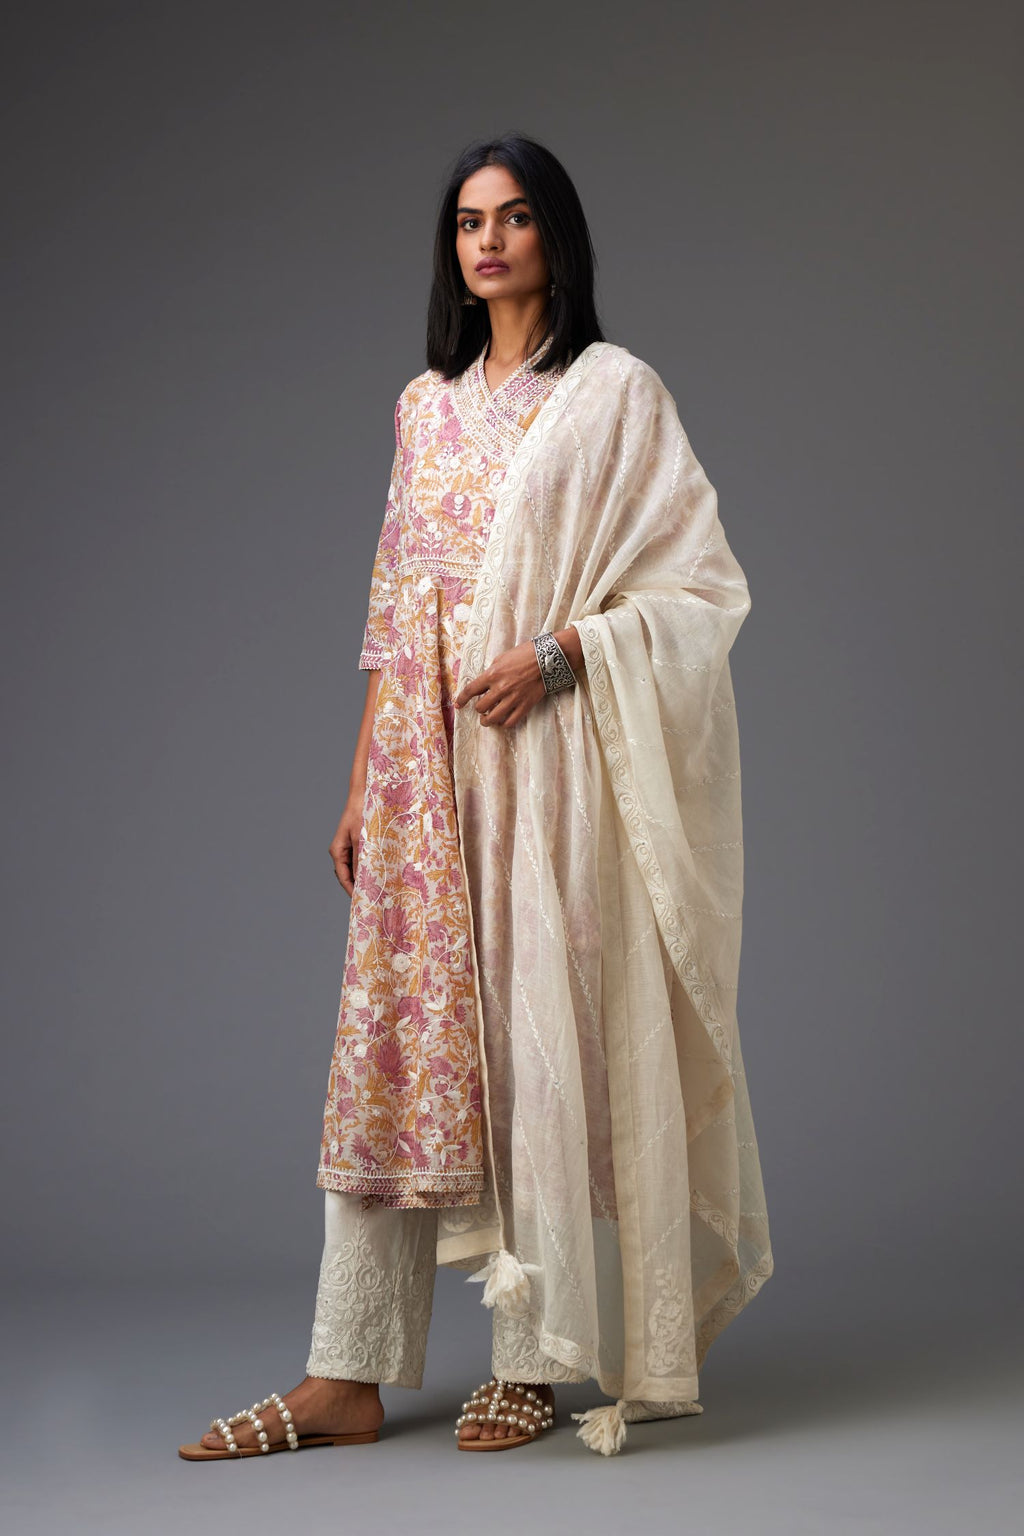 Off-white cotton chanderi dupatta with dori embroidery border at the edges and diagonal thread embroidered lines all-over the dupatta.